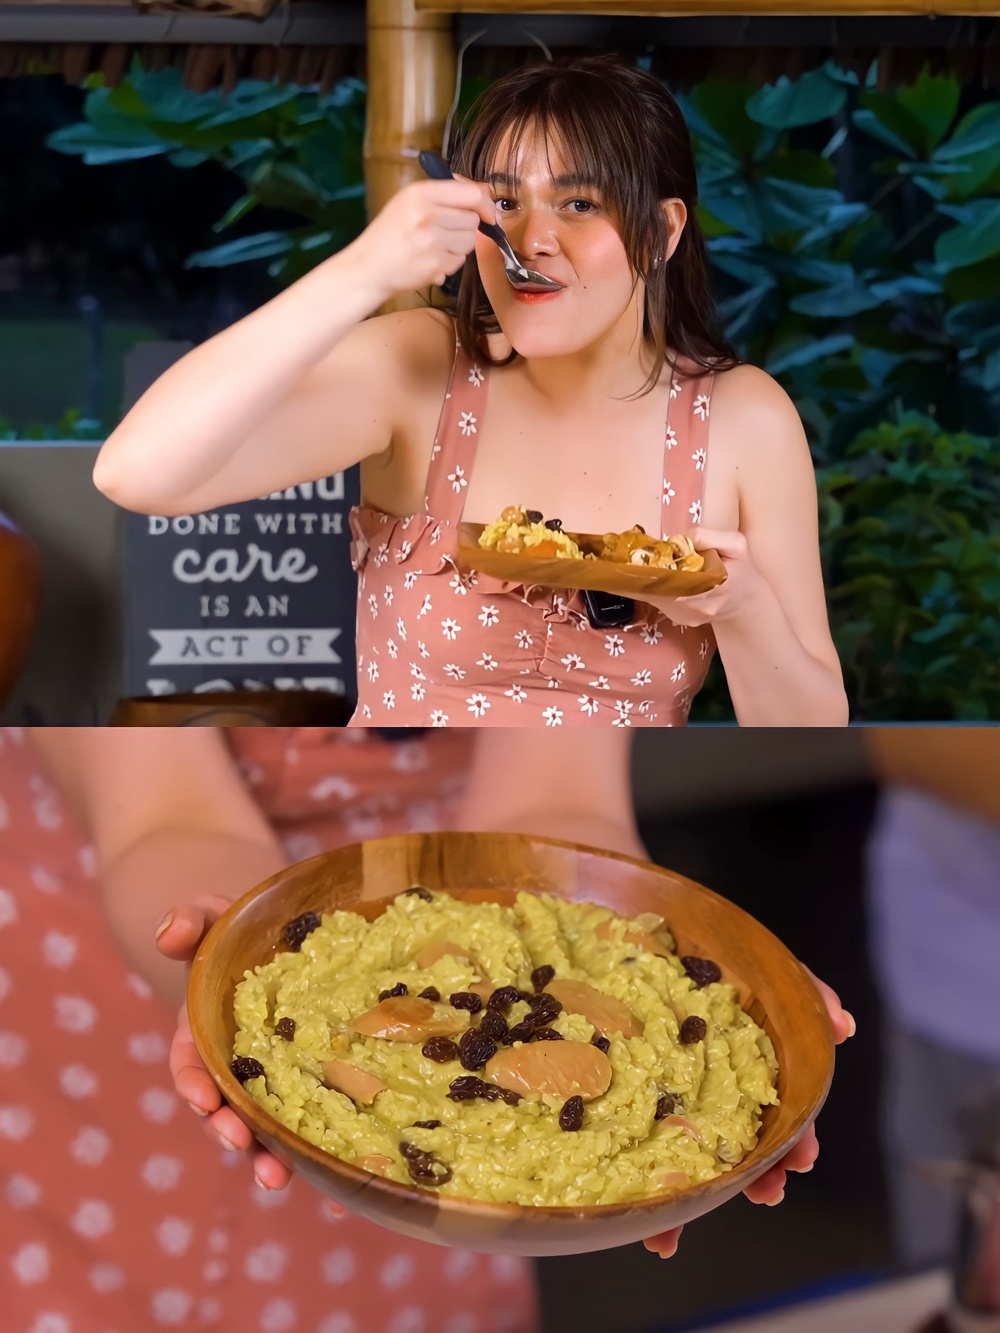 Bea Alonzo prepares arroz valenciana with brother James Carlos and sister-in-law Thalia Agbayani